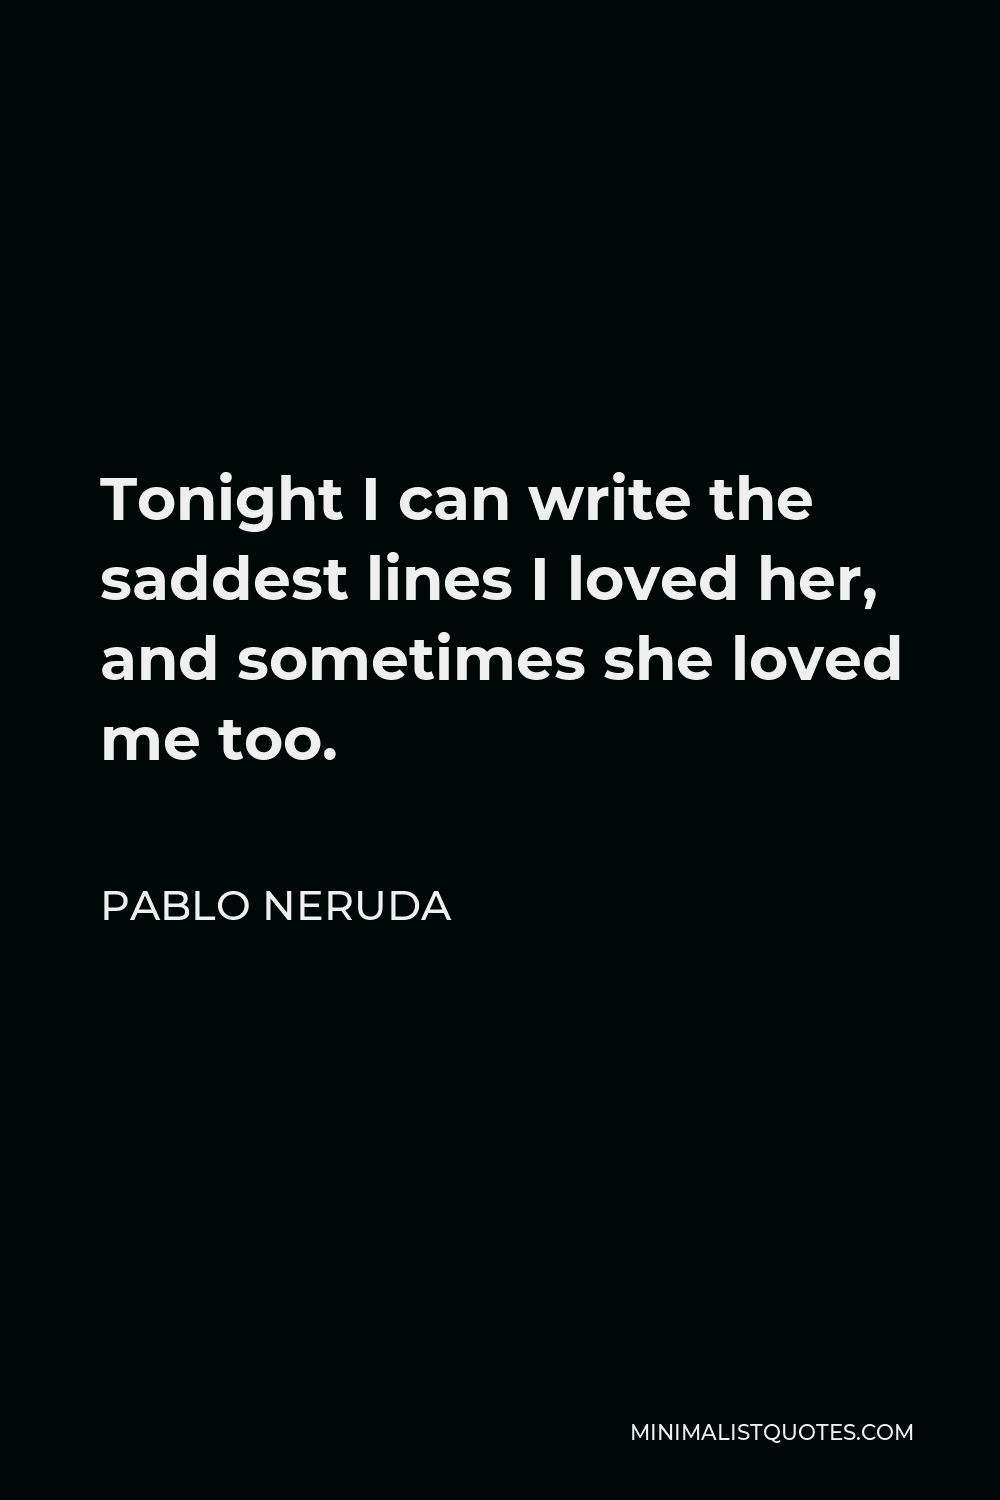 Pablo Neruda Quote: Tonight I can write the saddest lines I loved her ...